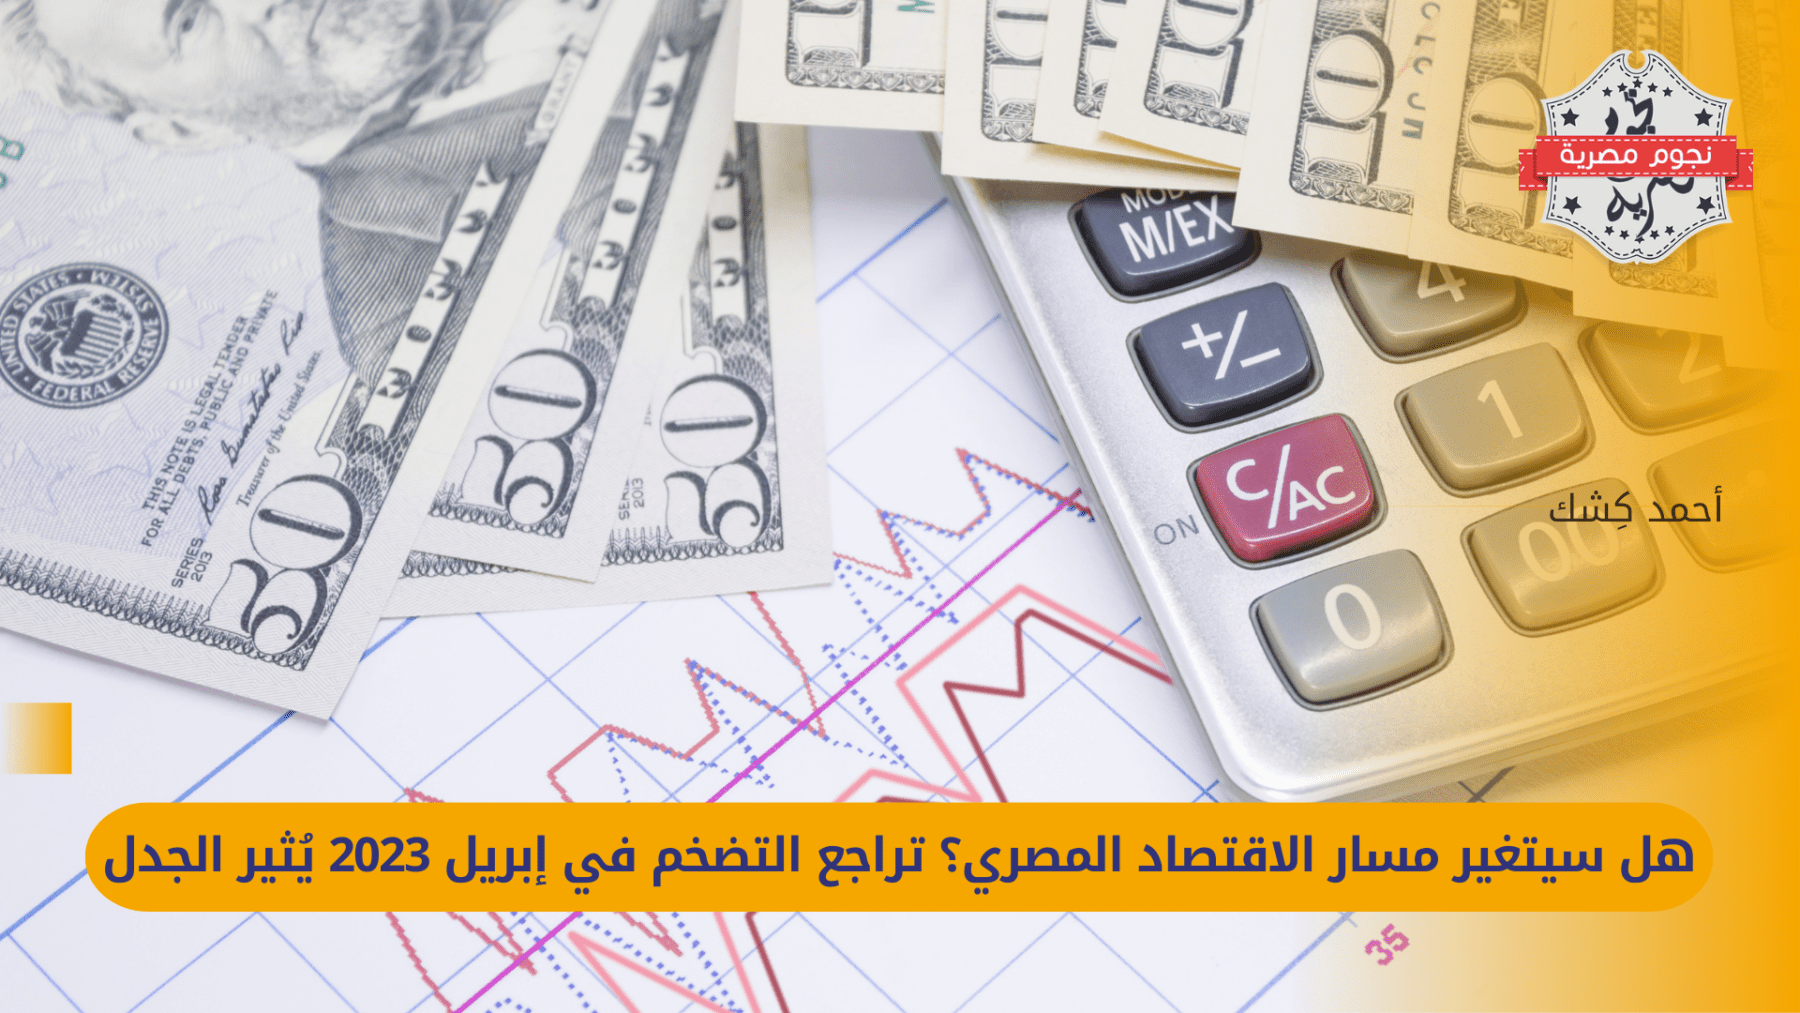 Will the course of the Egyptian economy change? The decline in inflation in April 2023 is controversial